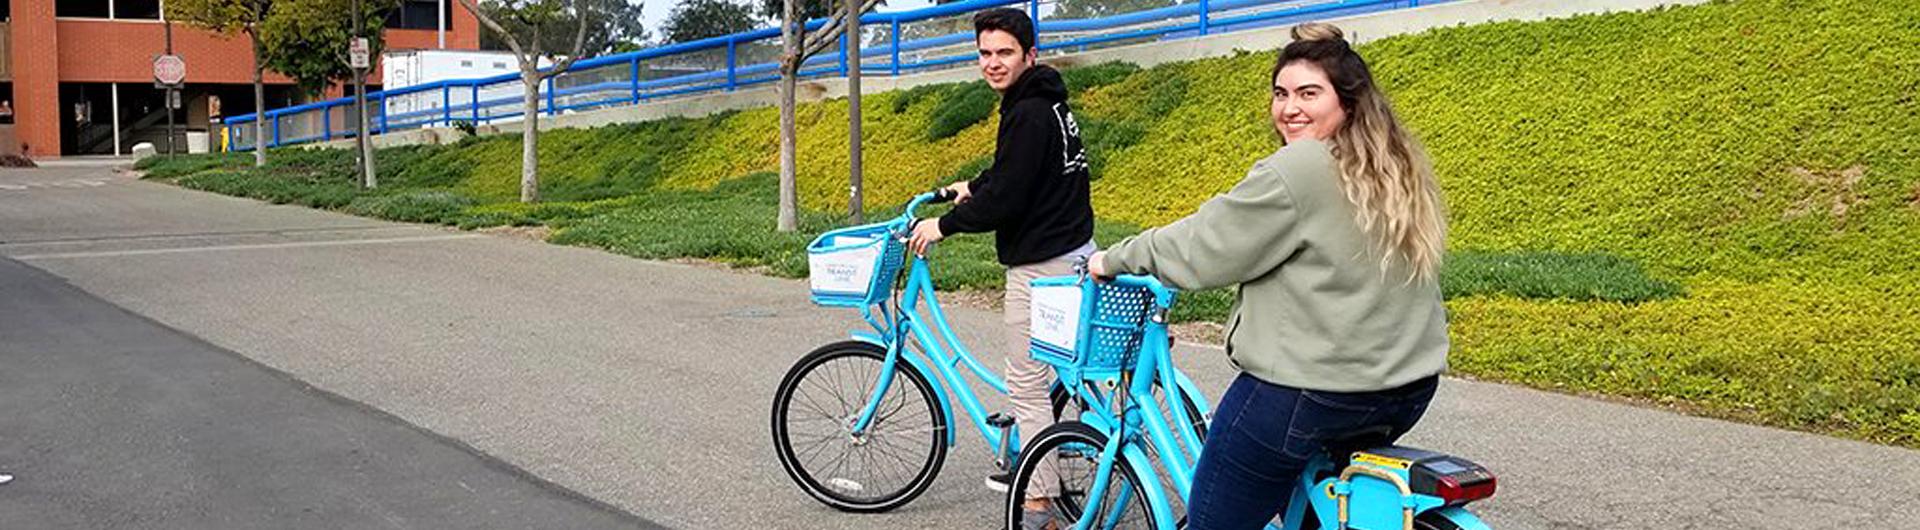 Two students riding on blue bikes